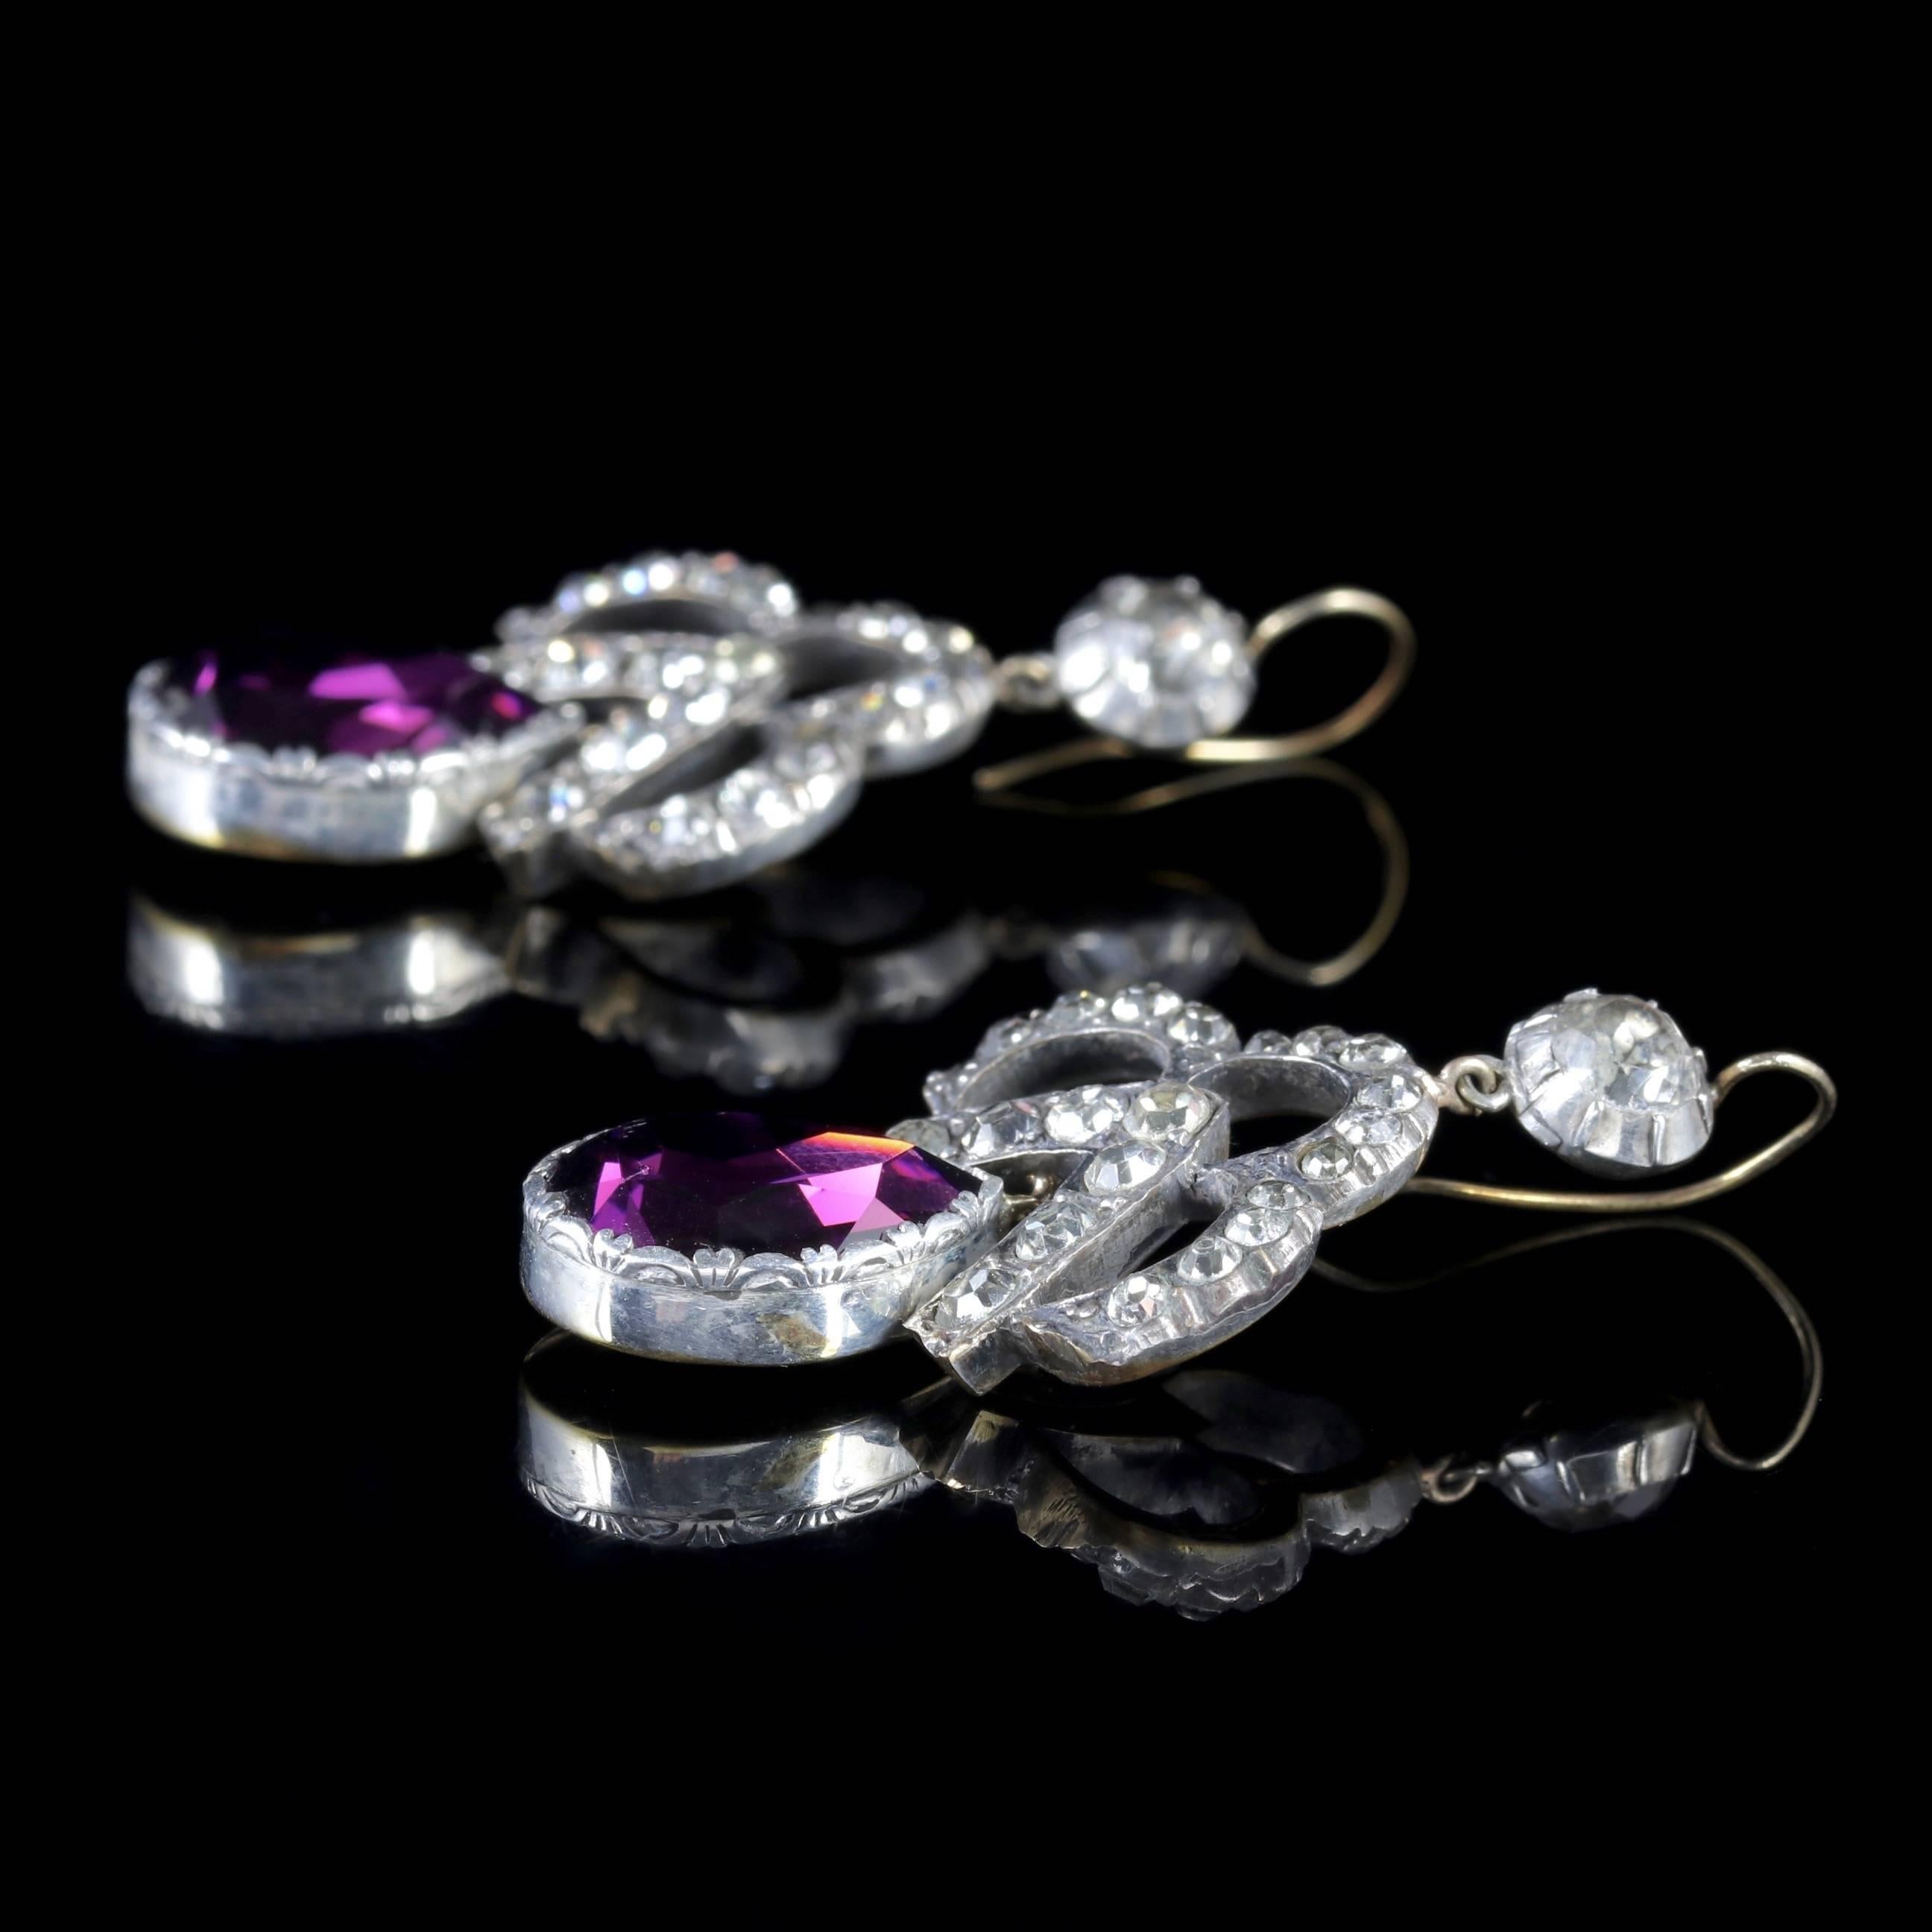 Women's Antique Victorian Paste Earrings Silver Gold, circa 1880 For Sale